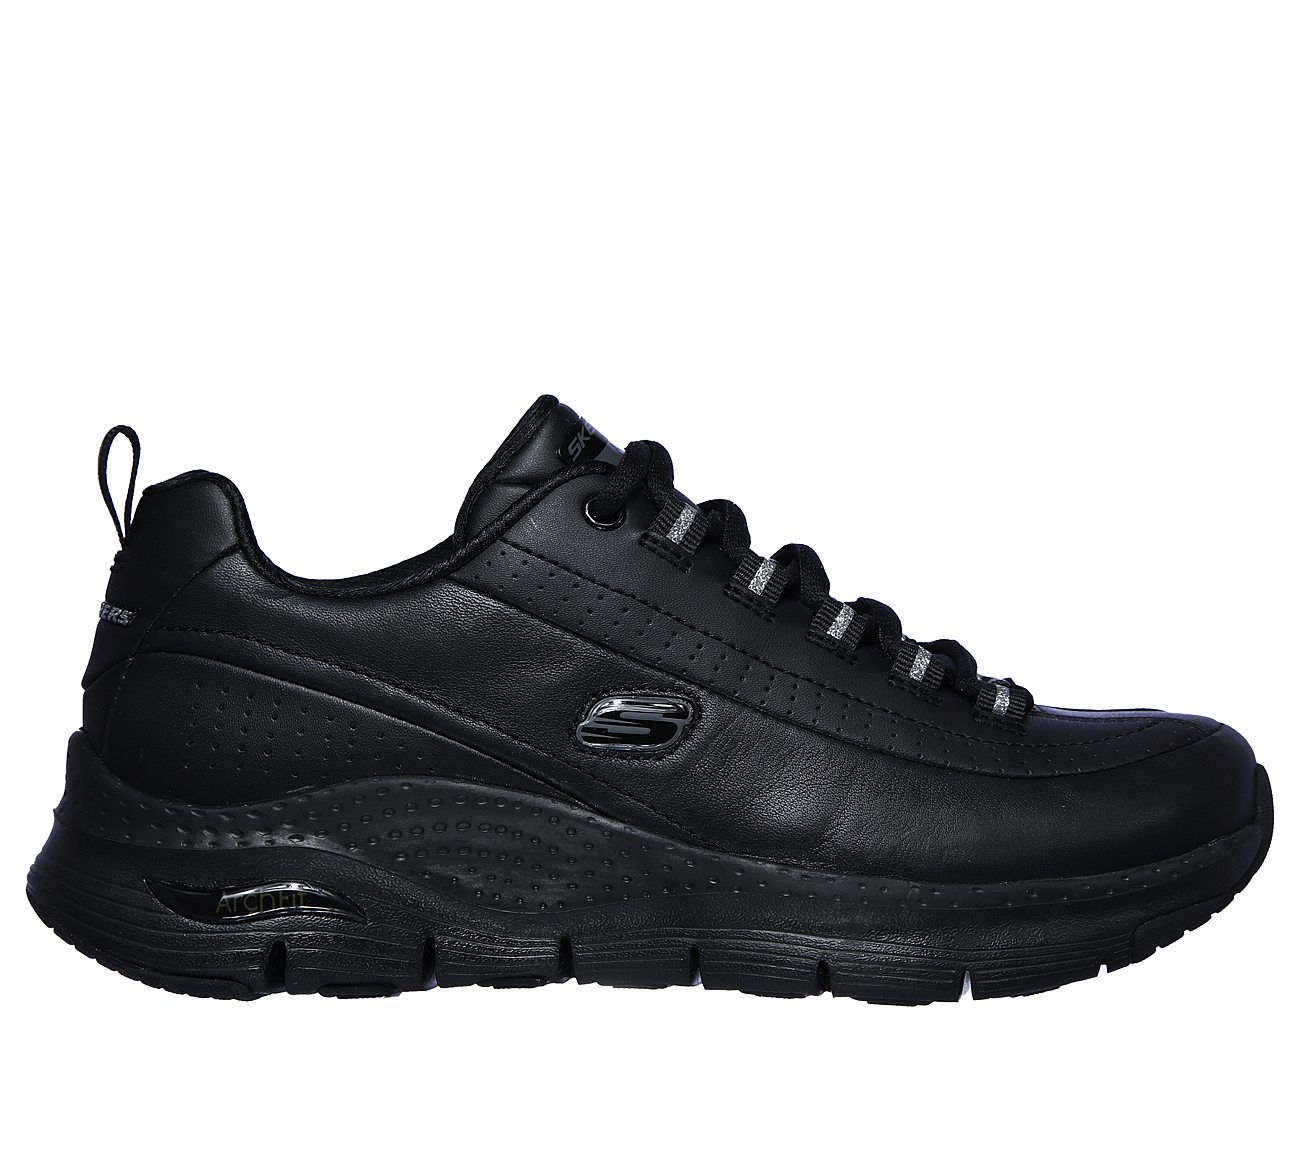 skechers shoes leather